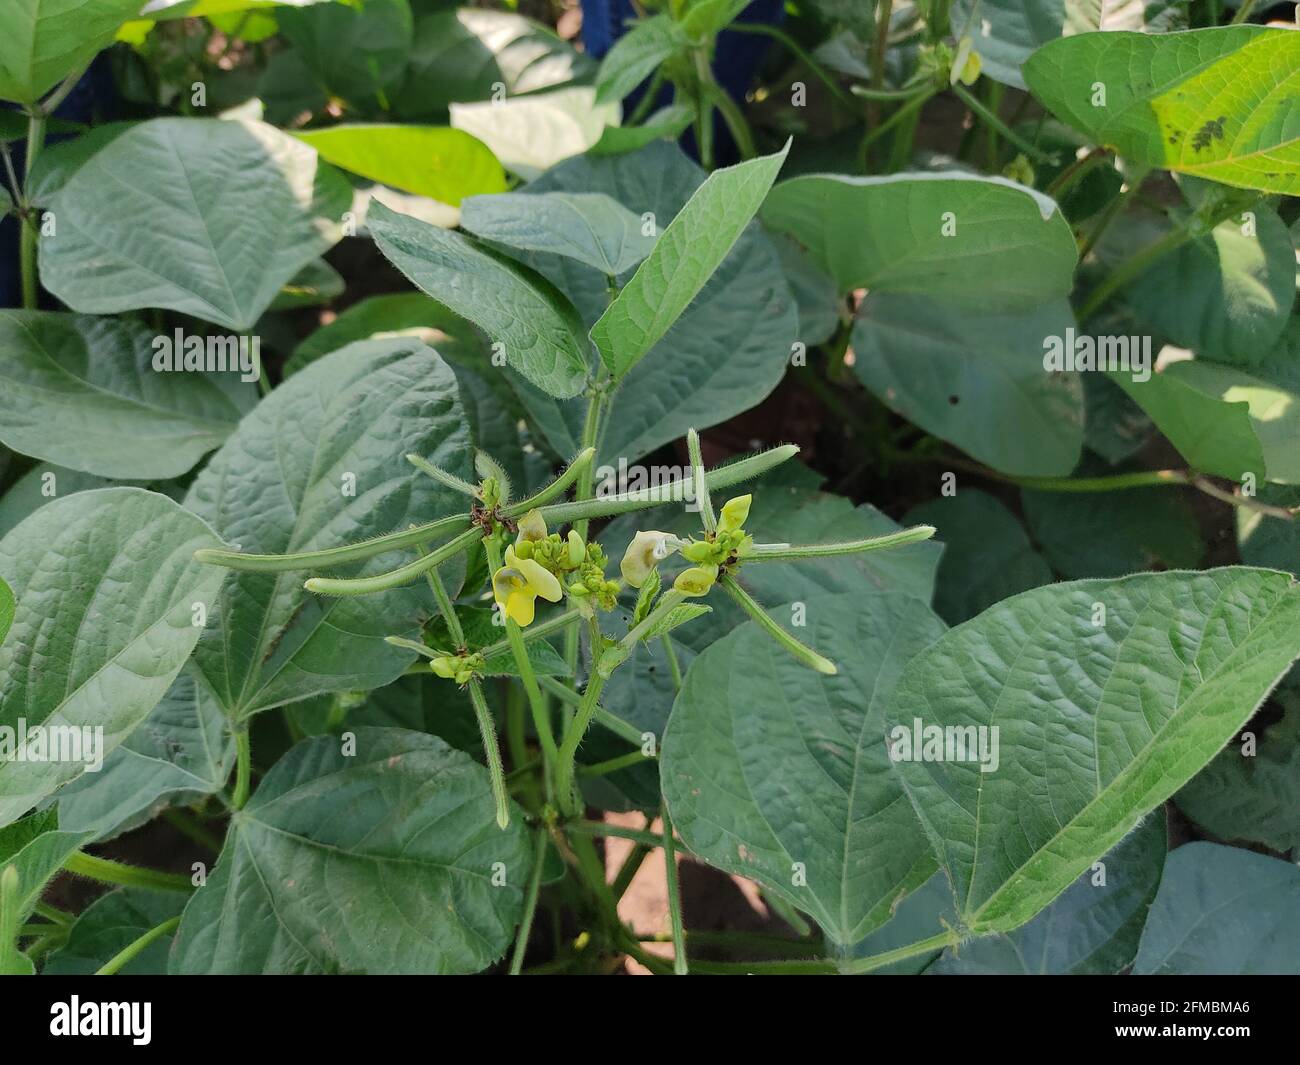 Green Mung bean crop close up in agriculture field, Mung bean green pods (Vigna radiata) and mung bean leaves on the mung bean stalk Stock Photo